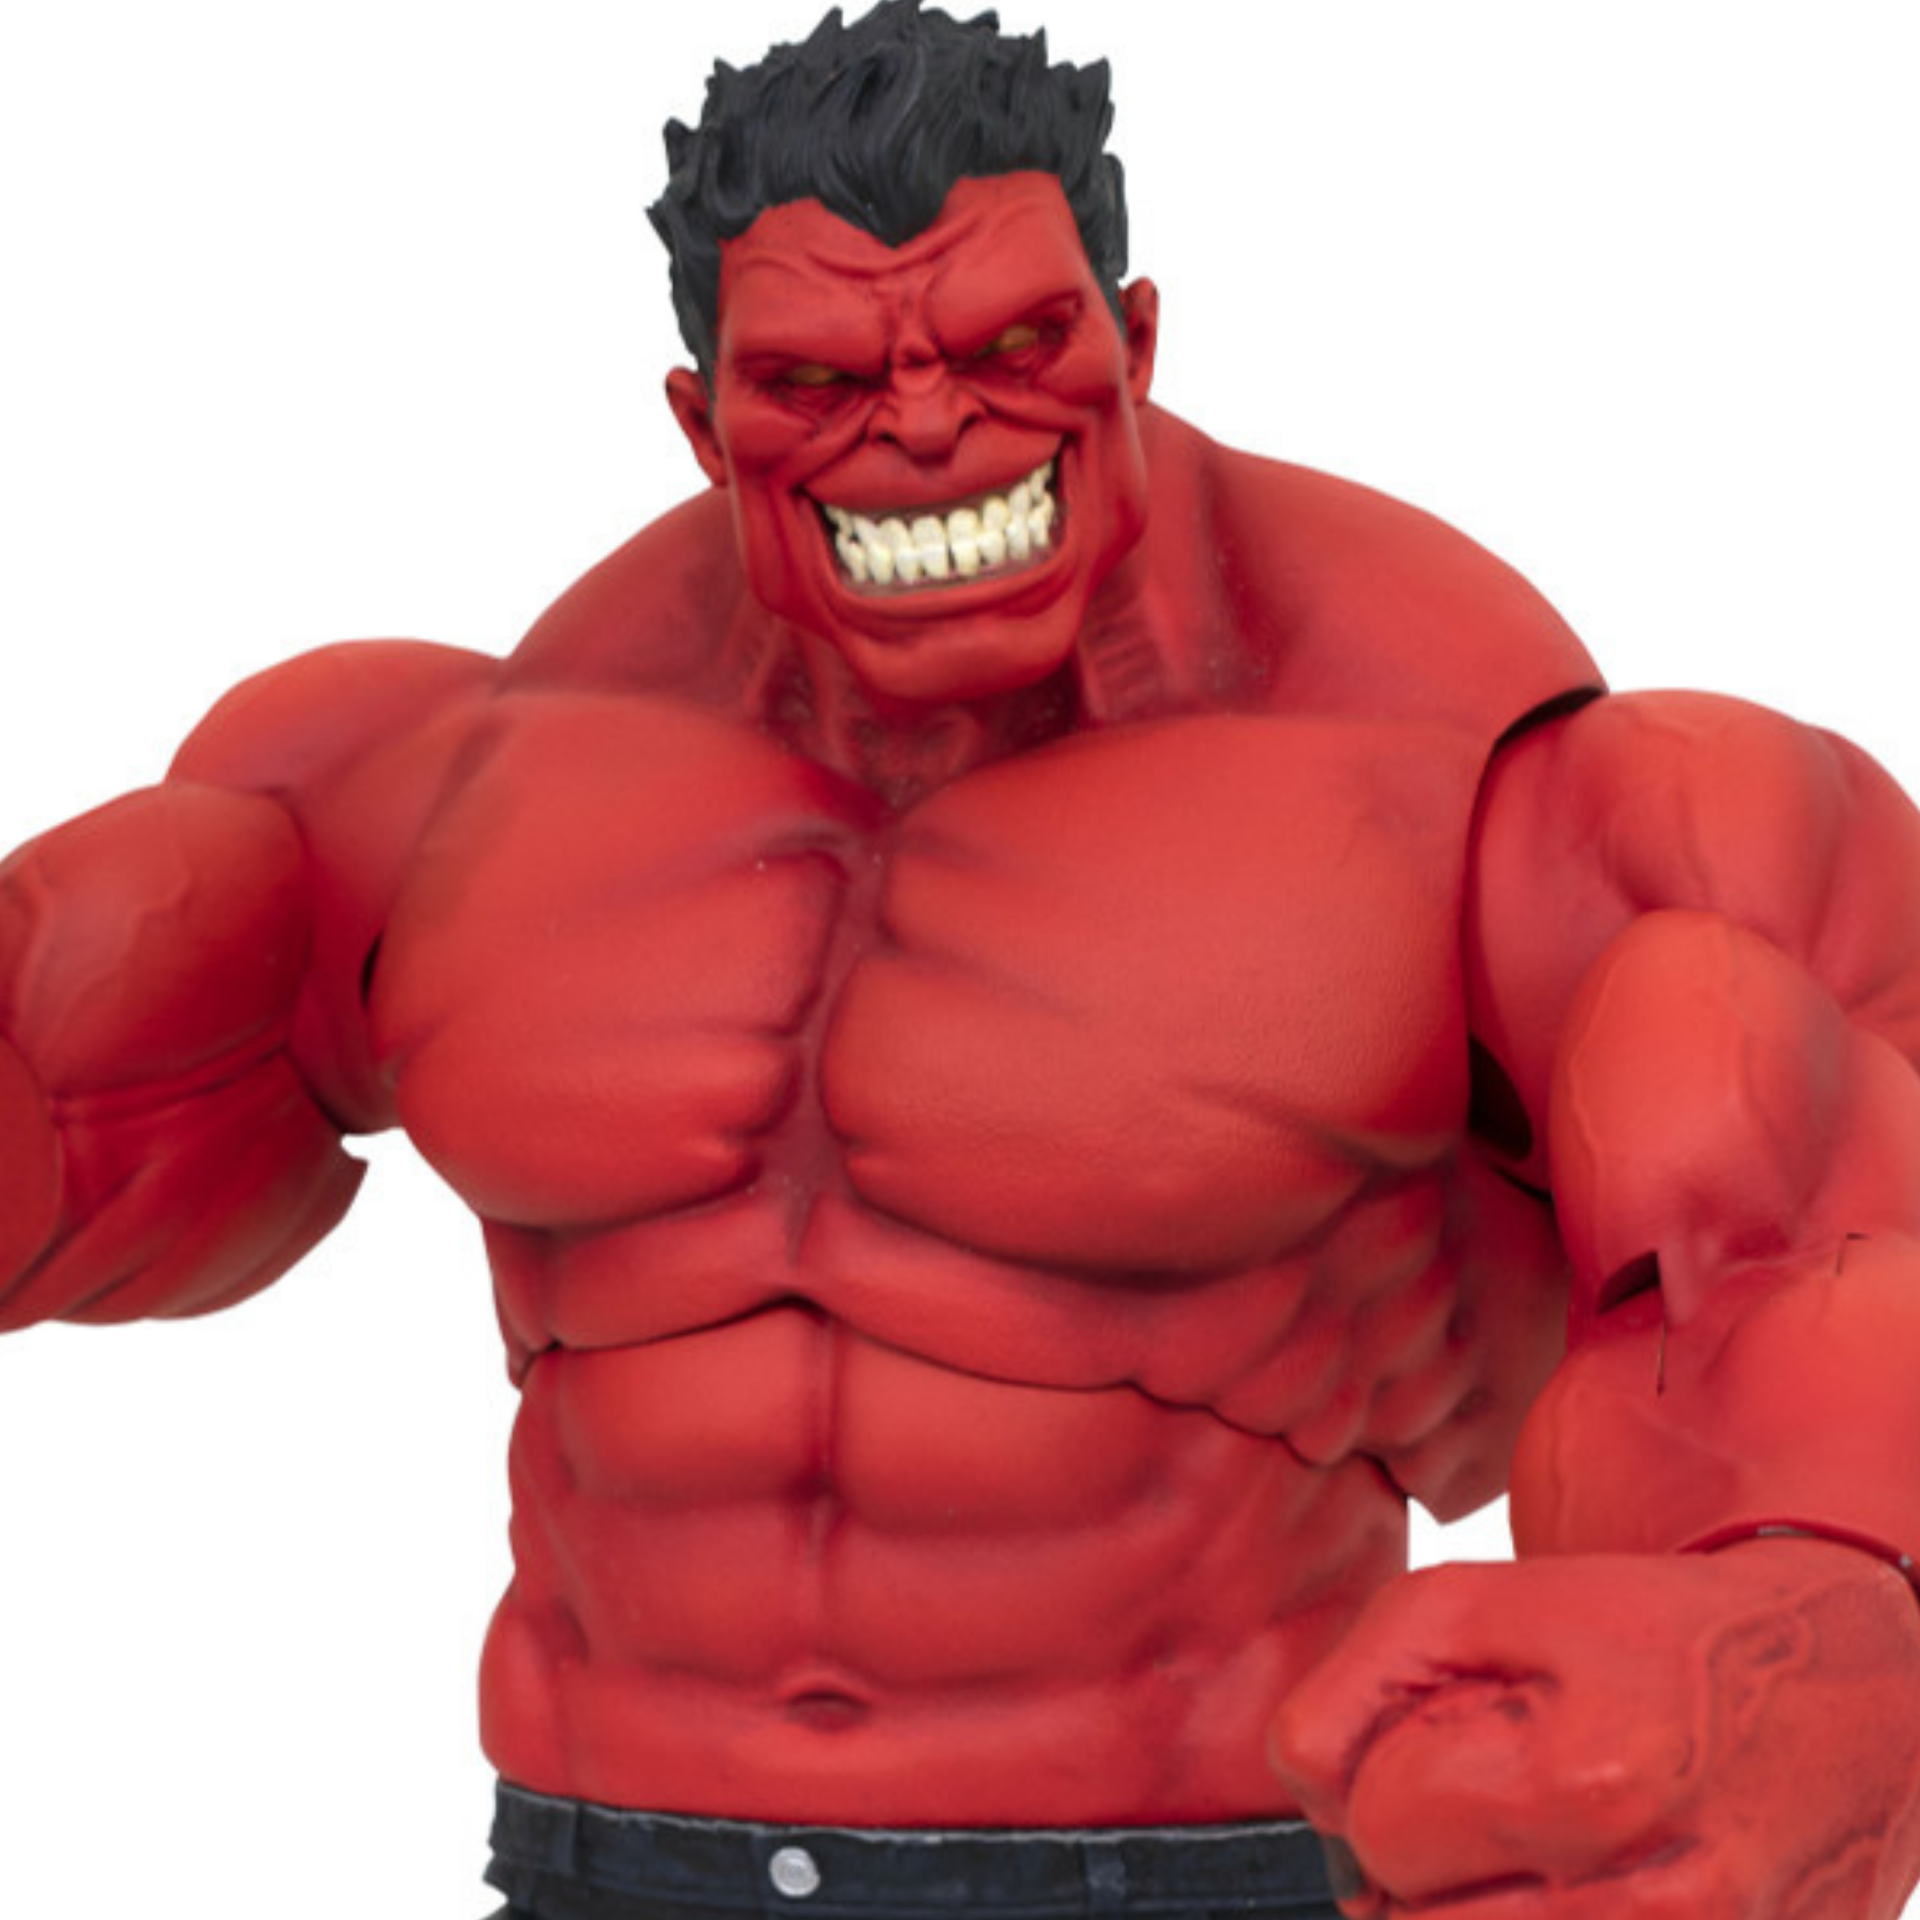 Diamond Select Toys - Marvel Select Series: Red Hulk (Deluxe) Aksiyon Figür